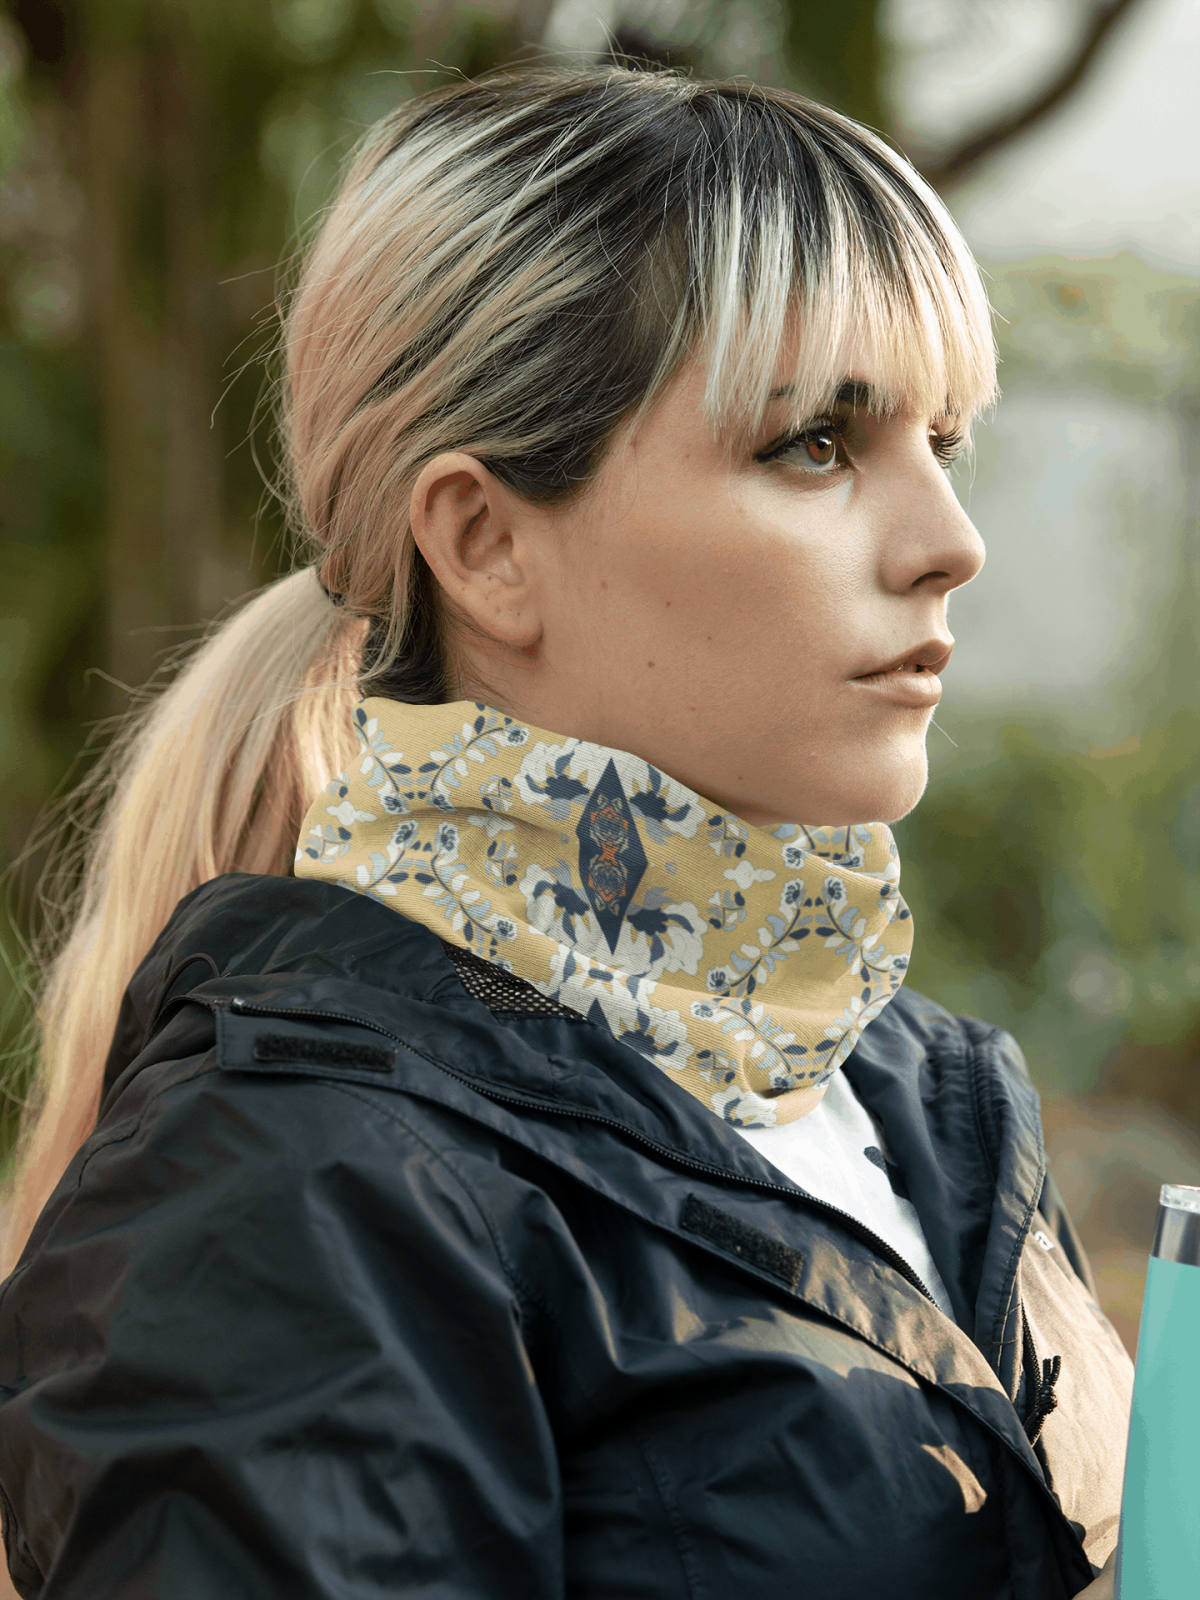 mockup of a young woman wearing a neck gaiter on the street 36141 3